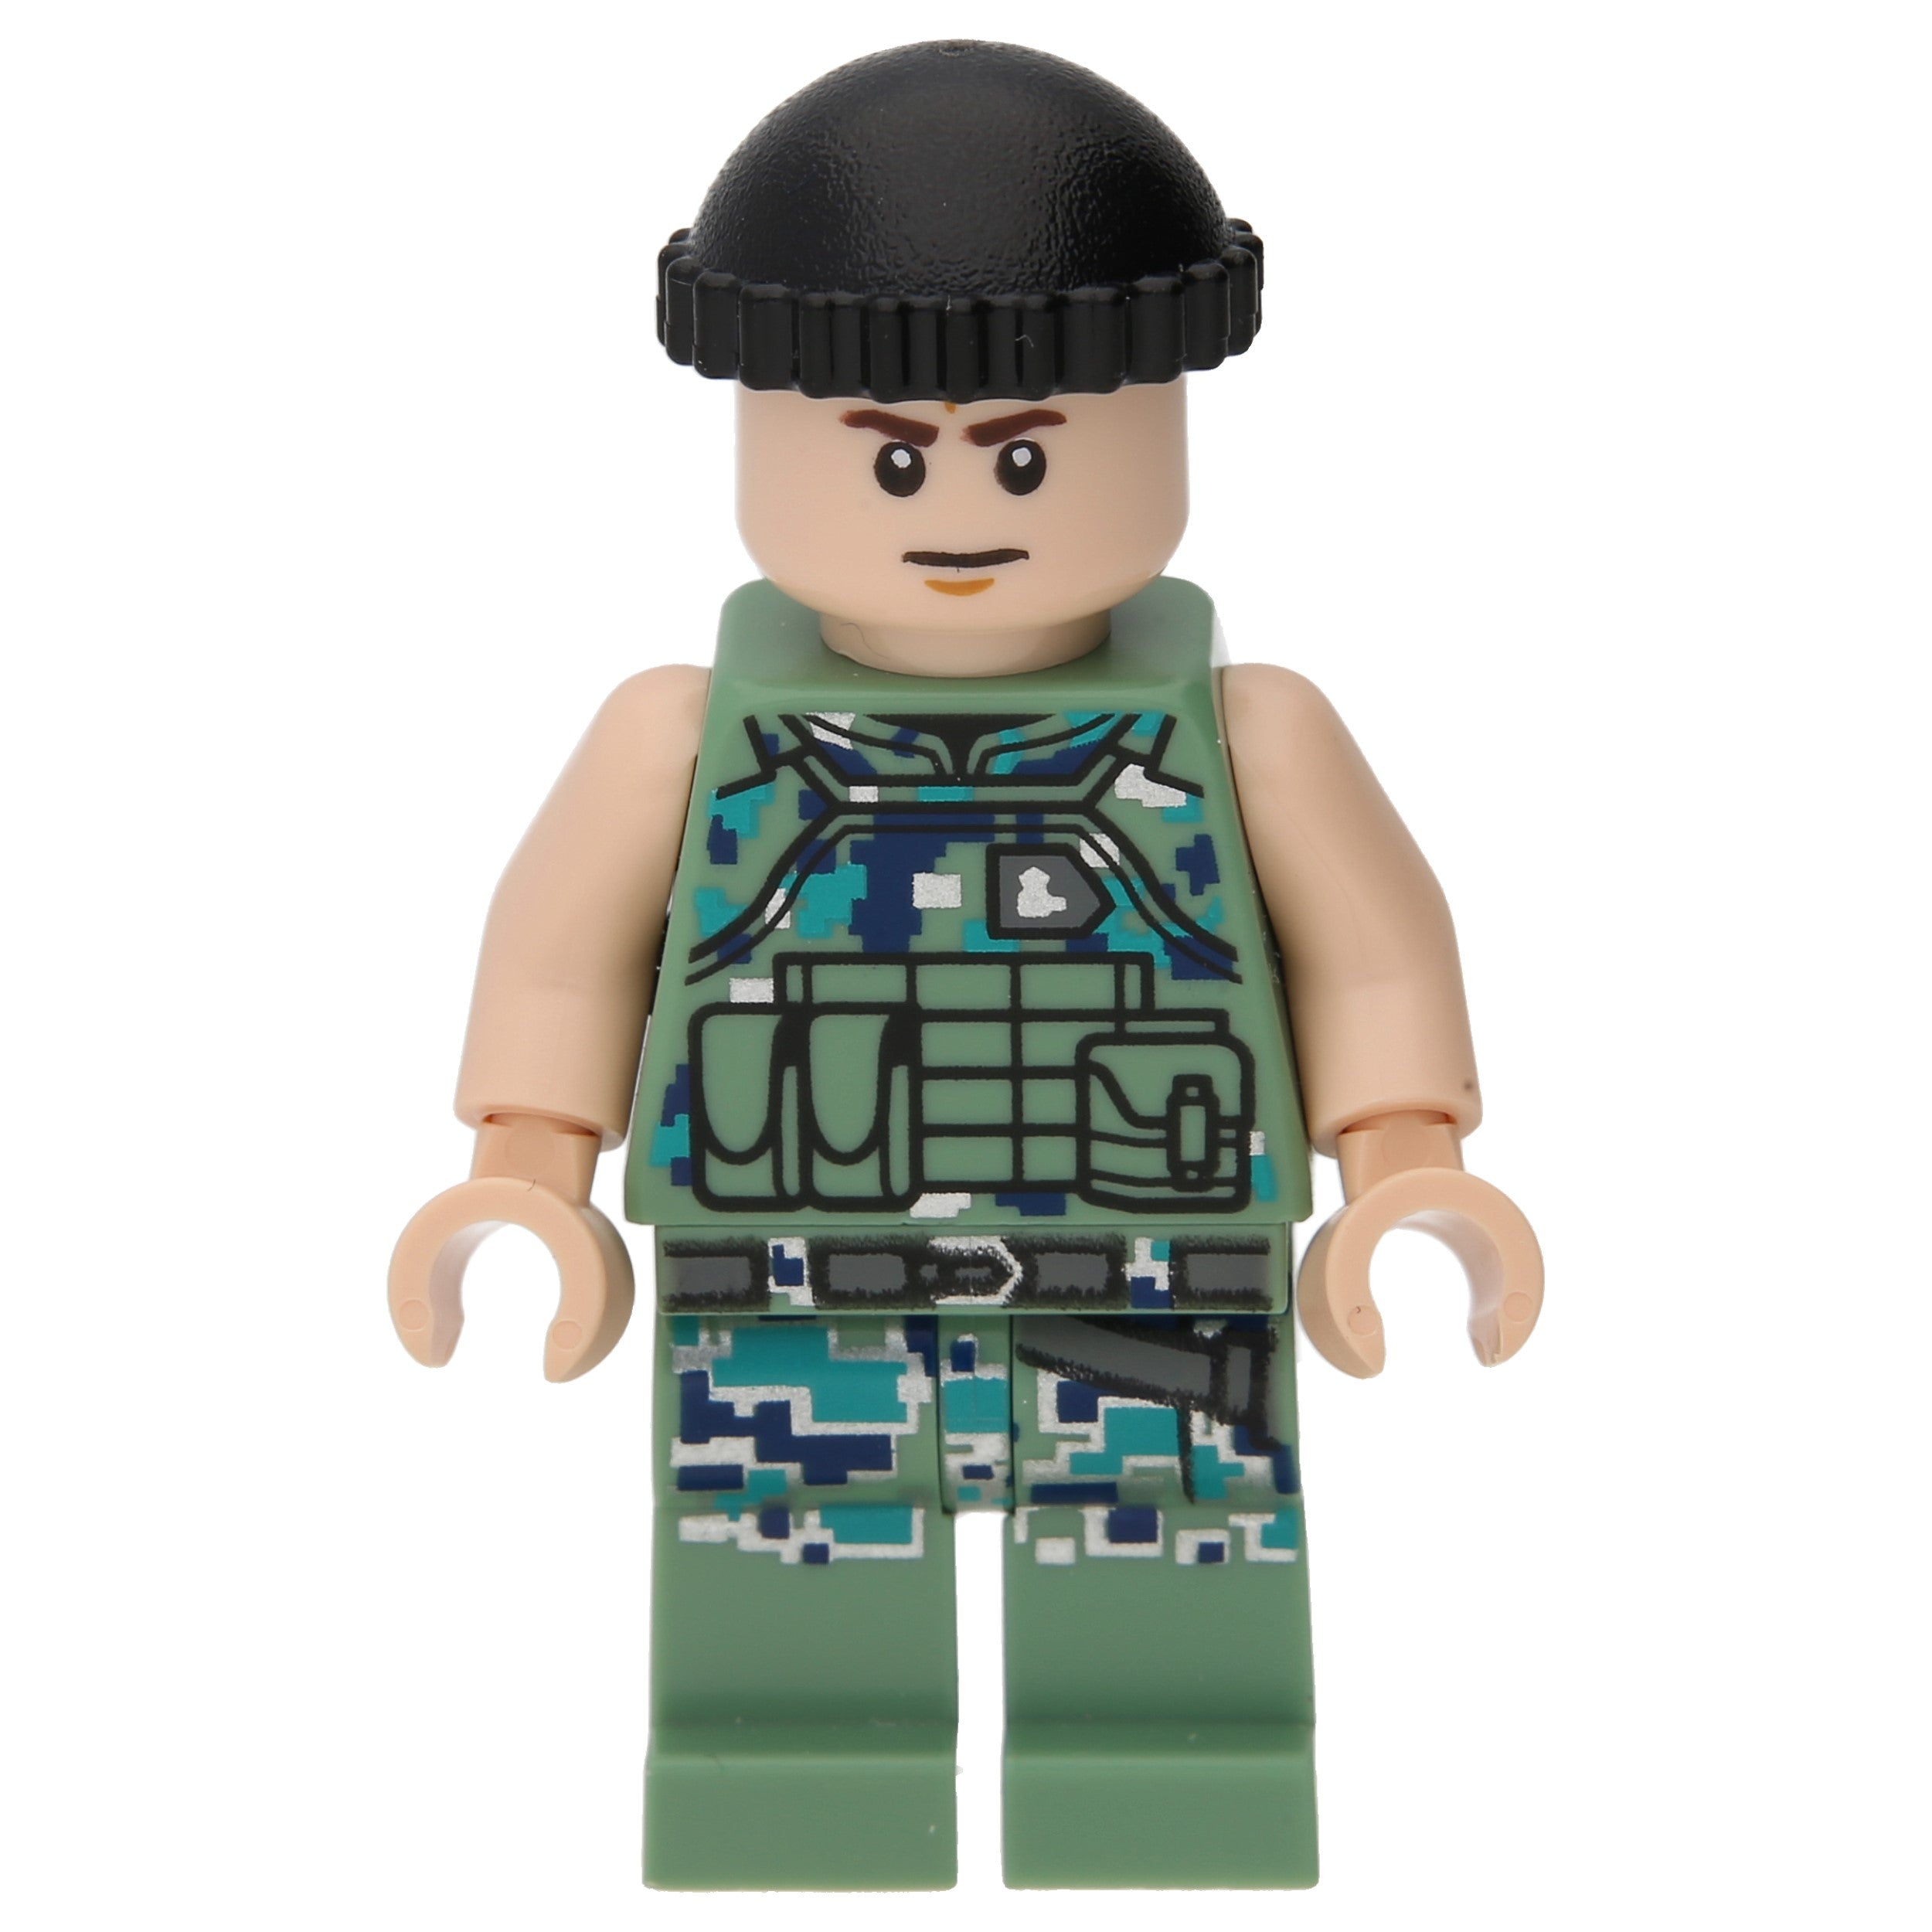 LEGO AVATAR Minifigures - RDA crabs suit pilot with weapon - AVT017 - Avatar: The Way of Water